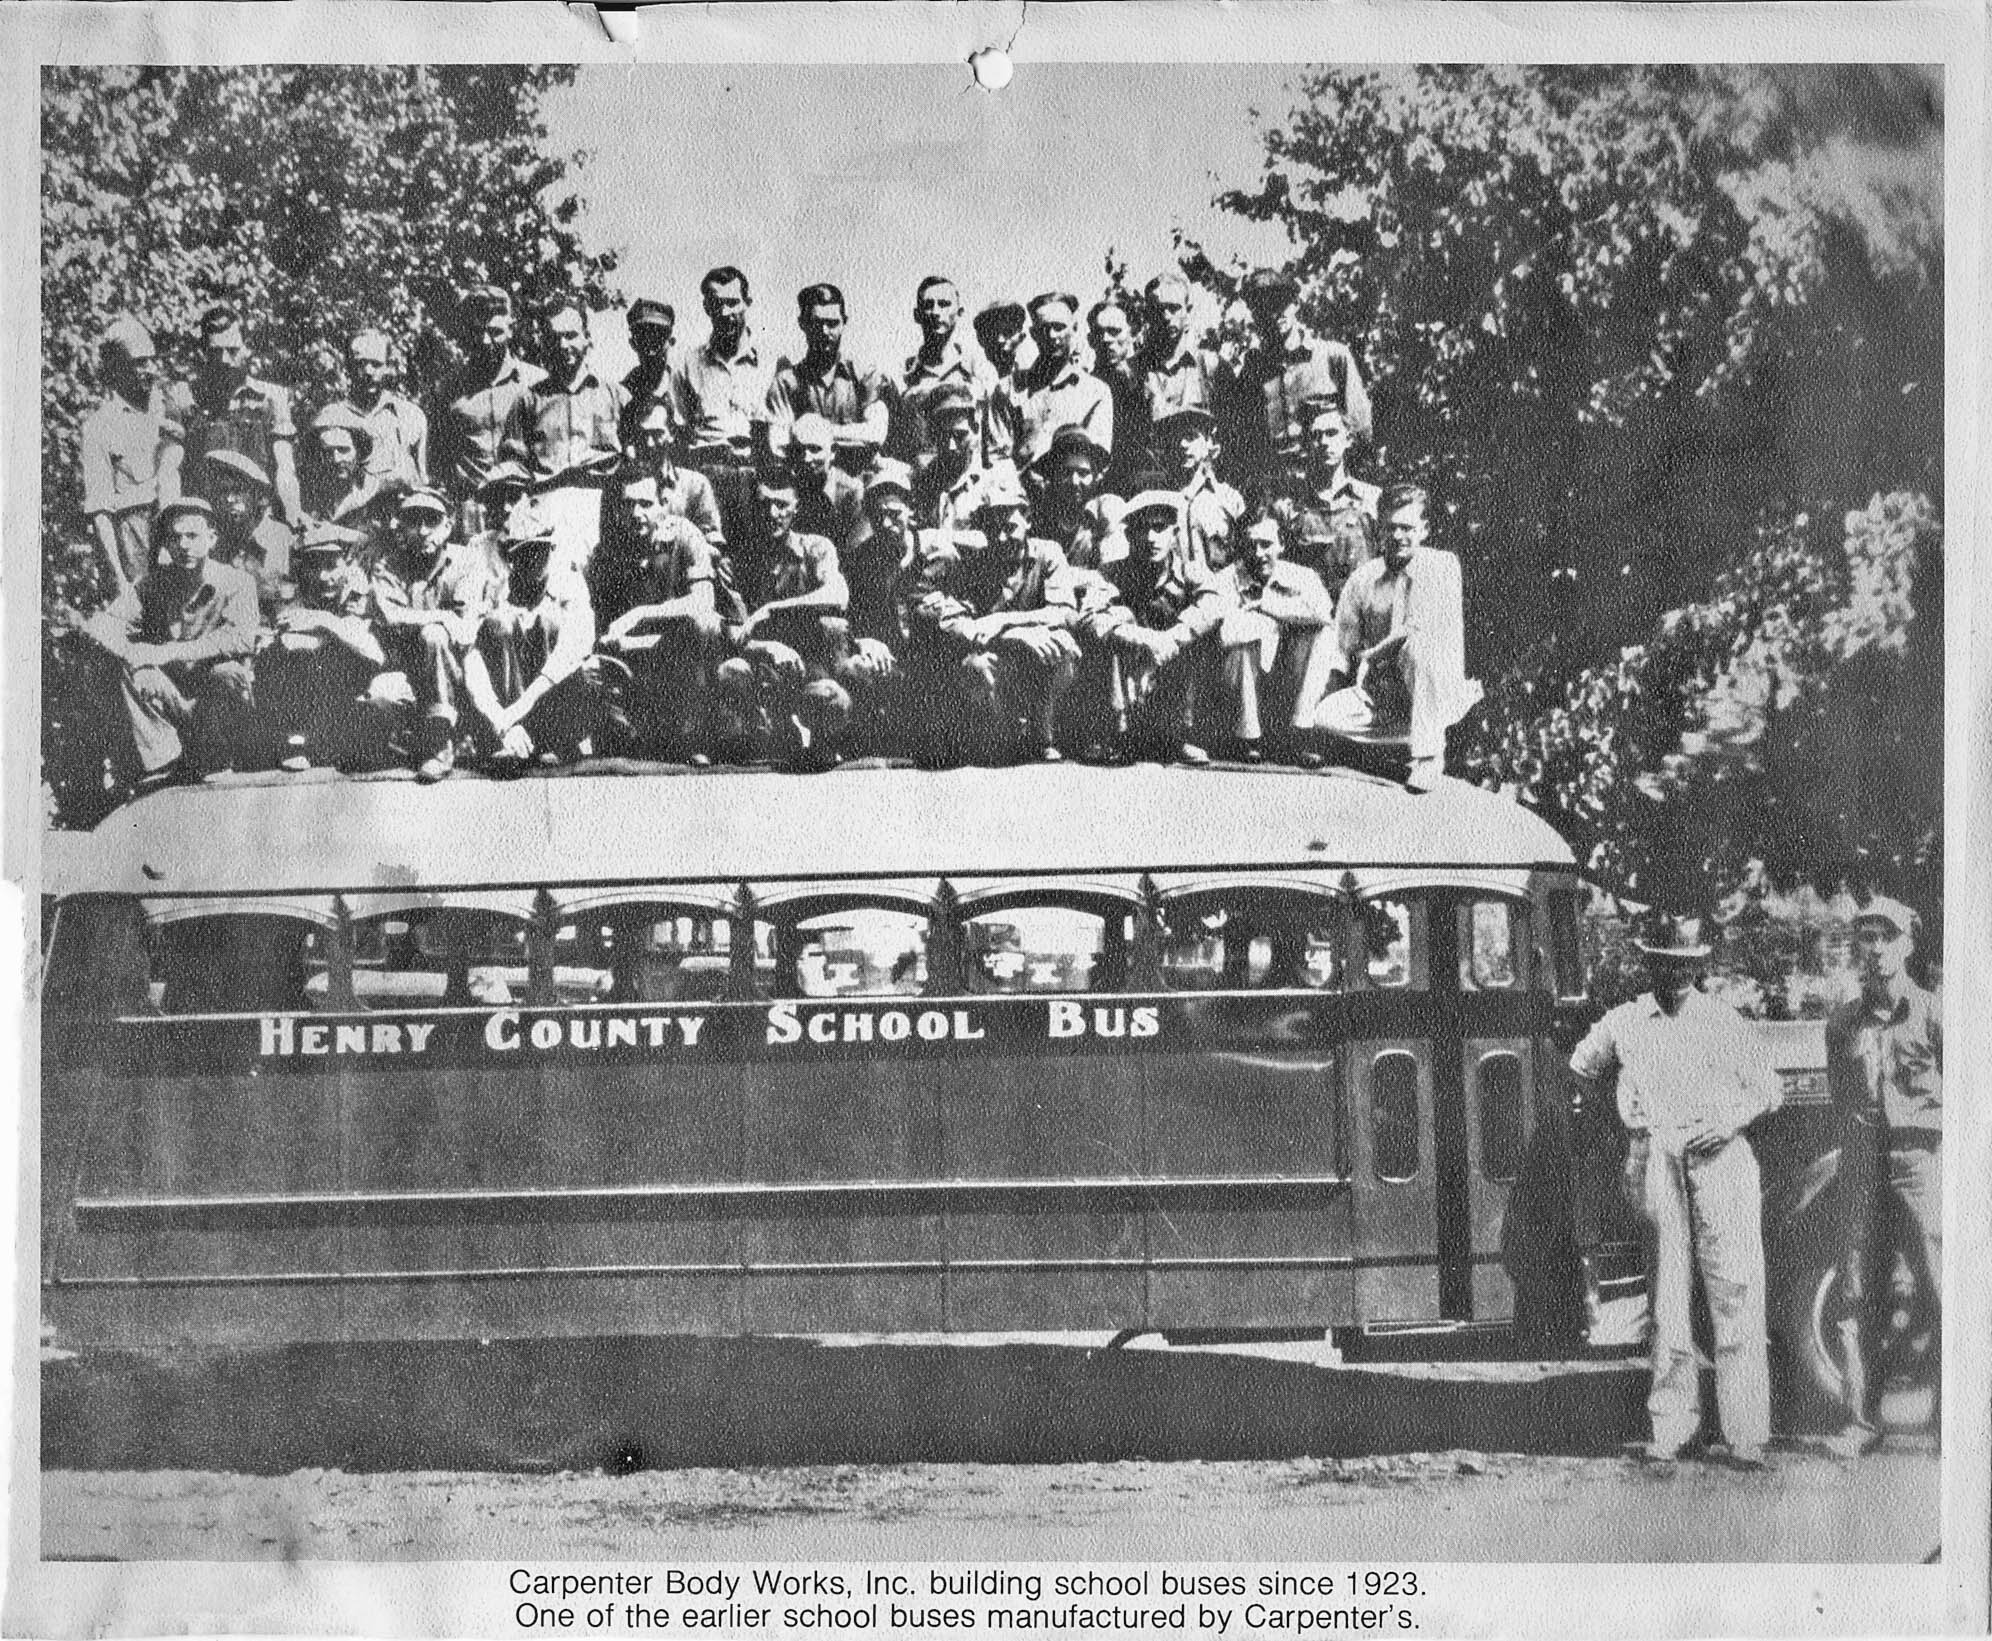  This is the first all-metal
school bus ever produced by Carpenter Body Works. It is a 1935 Dodge bus.&nbsp;All 35 Carpenter
employees are standing on top of the bus, and Ralph Carpenter and Ollie Eager
standing in the foreground. 

   





 



  ​